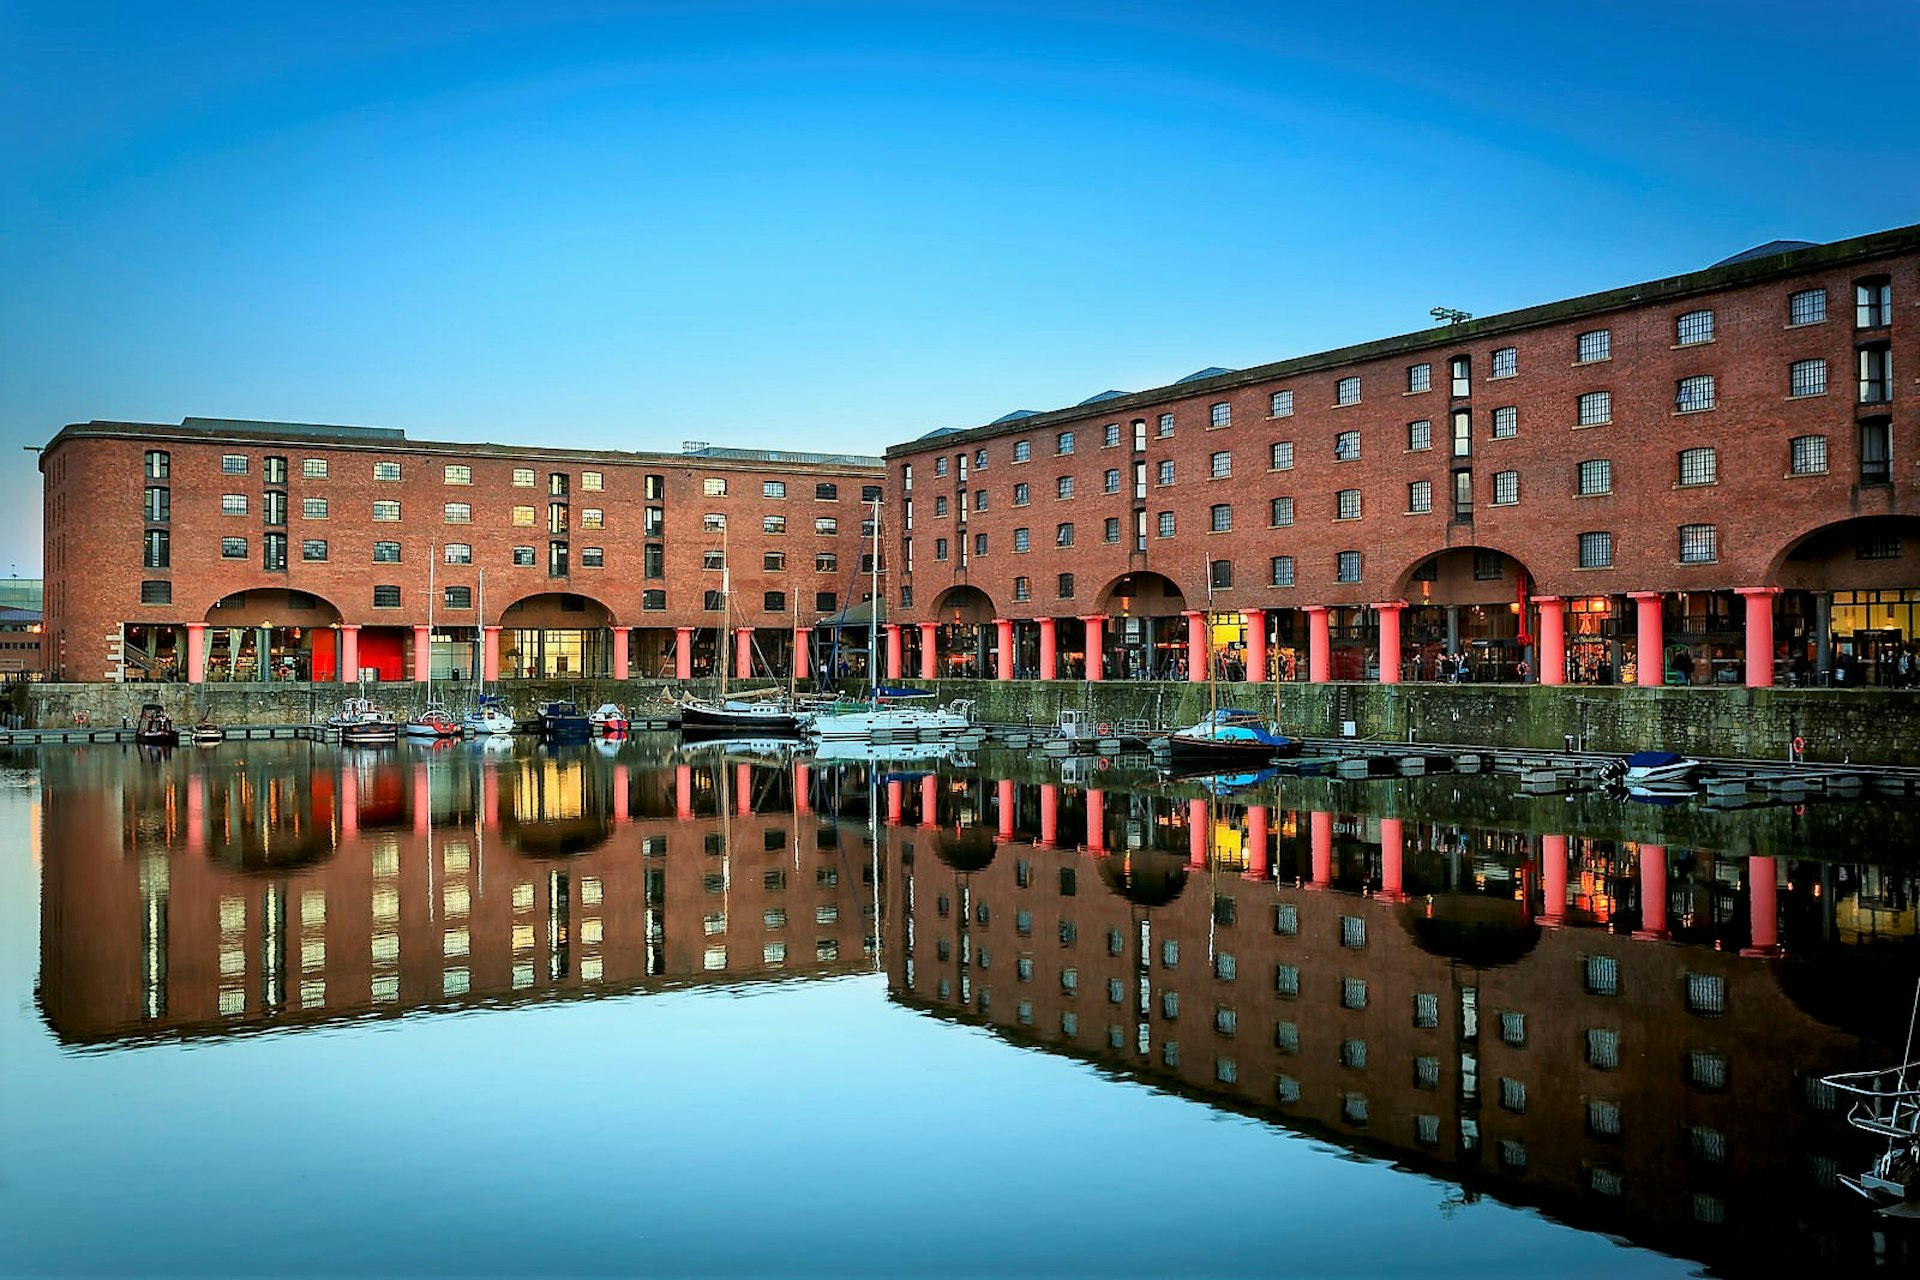 Albert Dock, Liverpool. The red-brick building is reflected in the glassy water of the dock. 